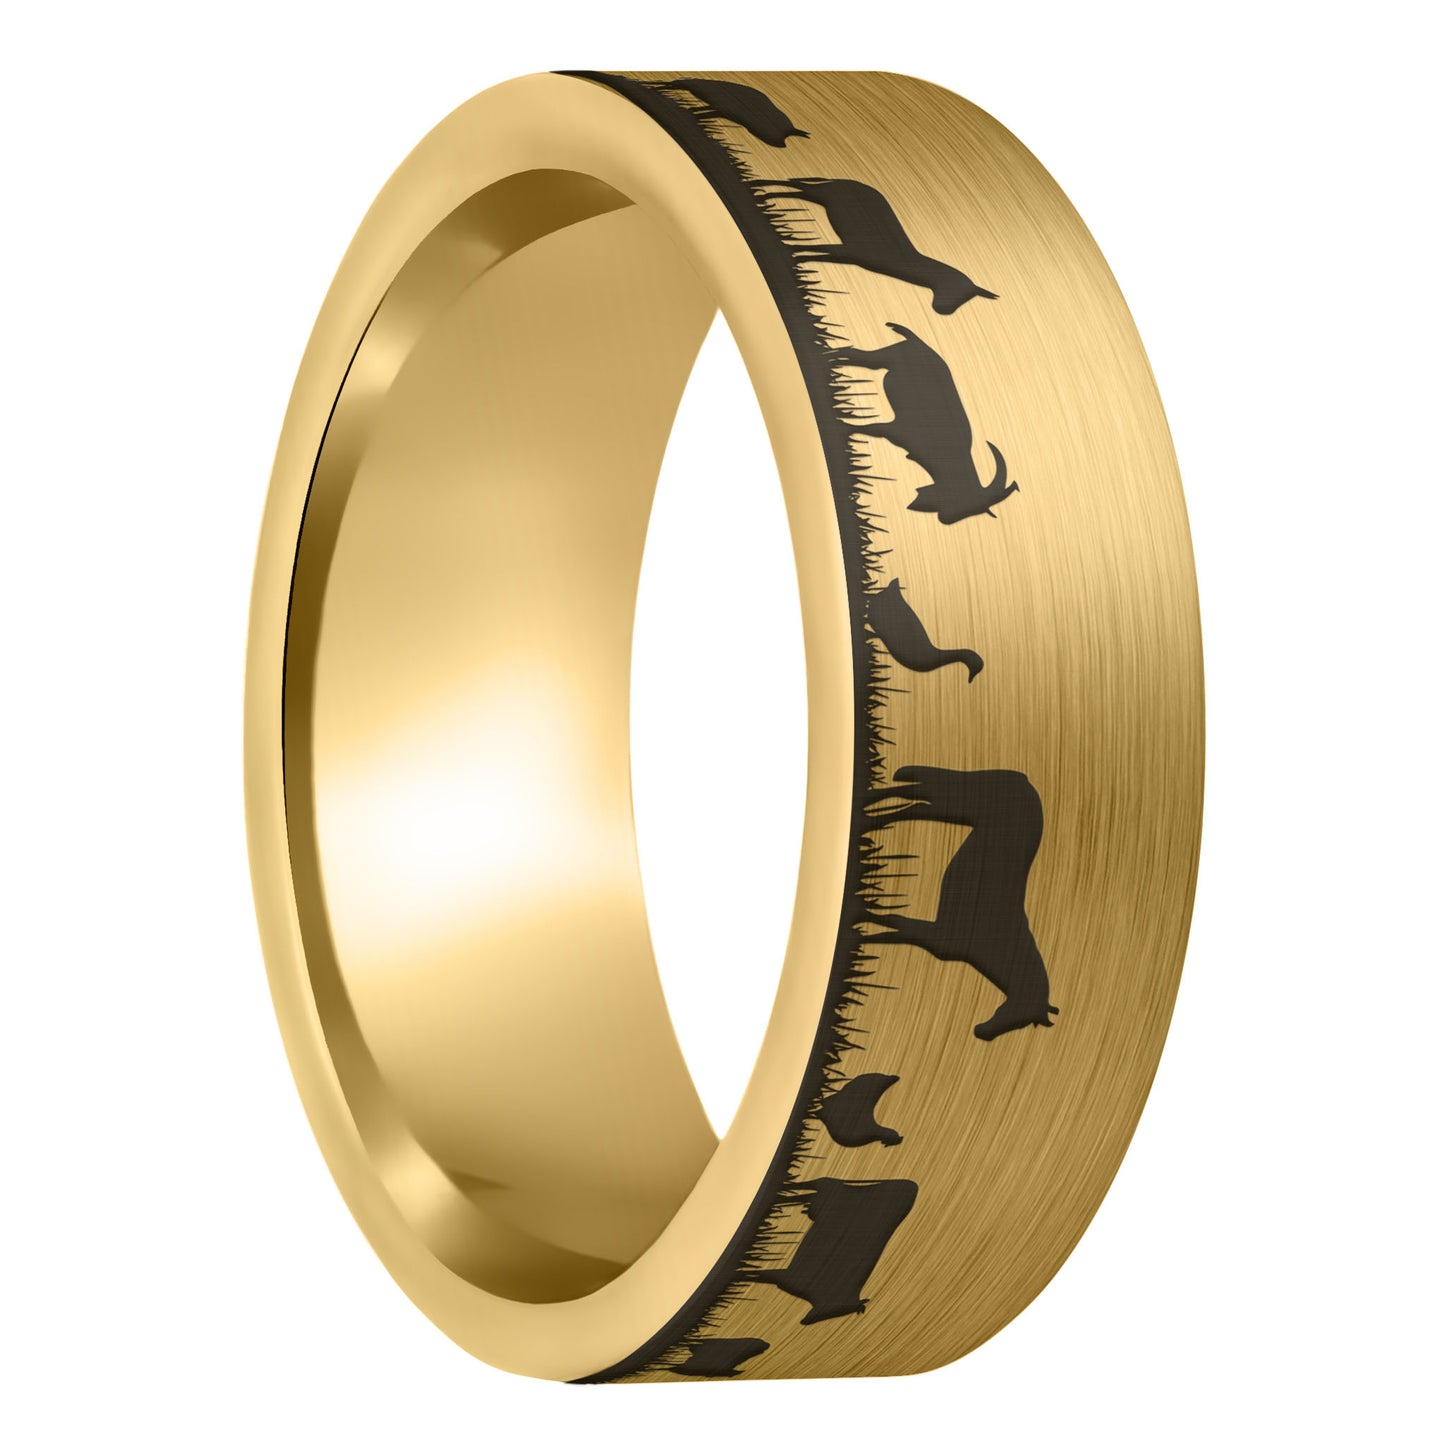 A farm animals brushed gold tungsten men's wedding band displayed on a plain white background.